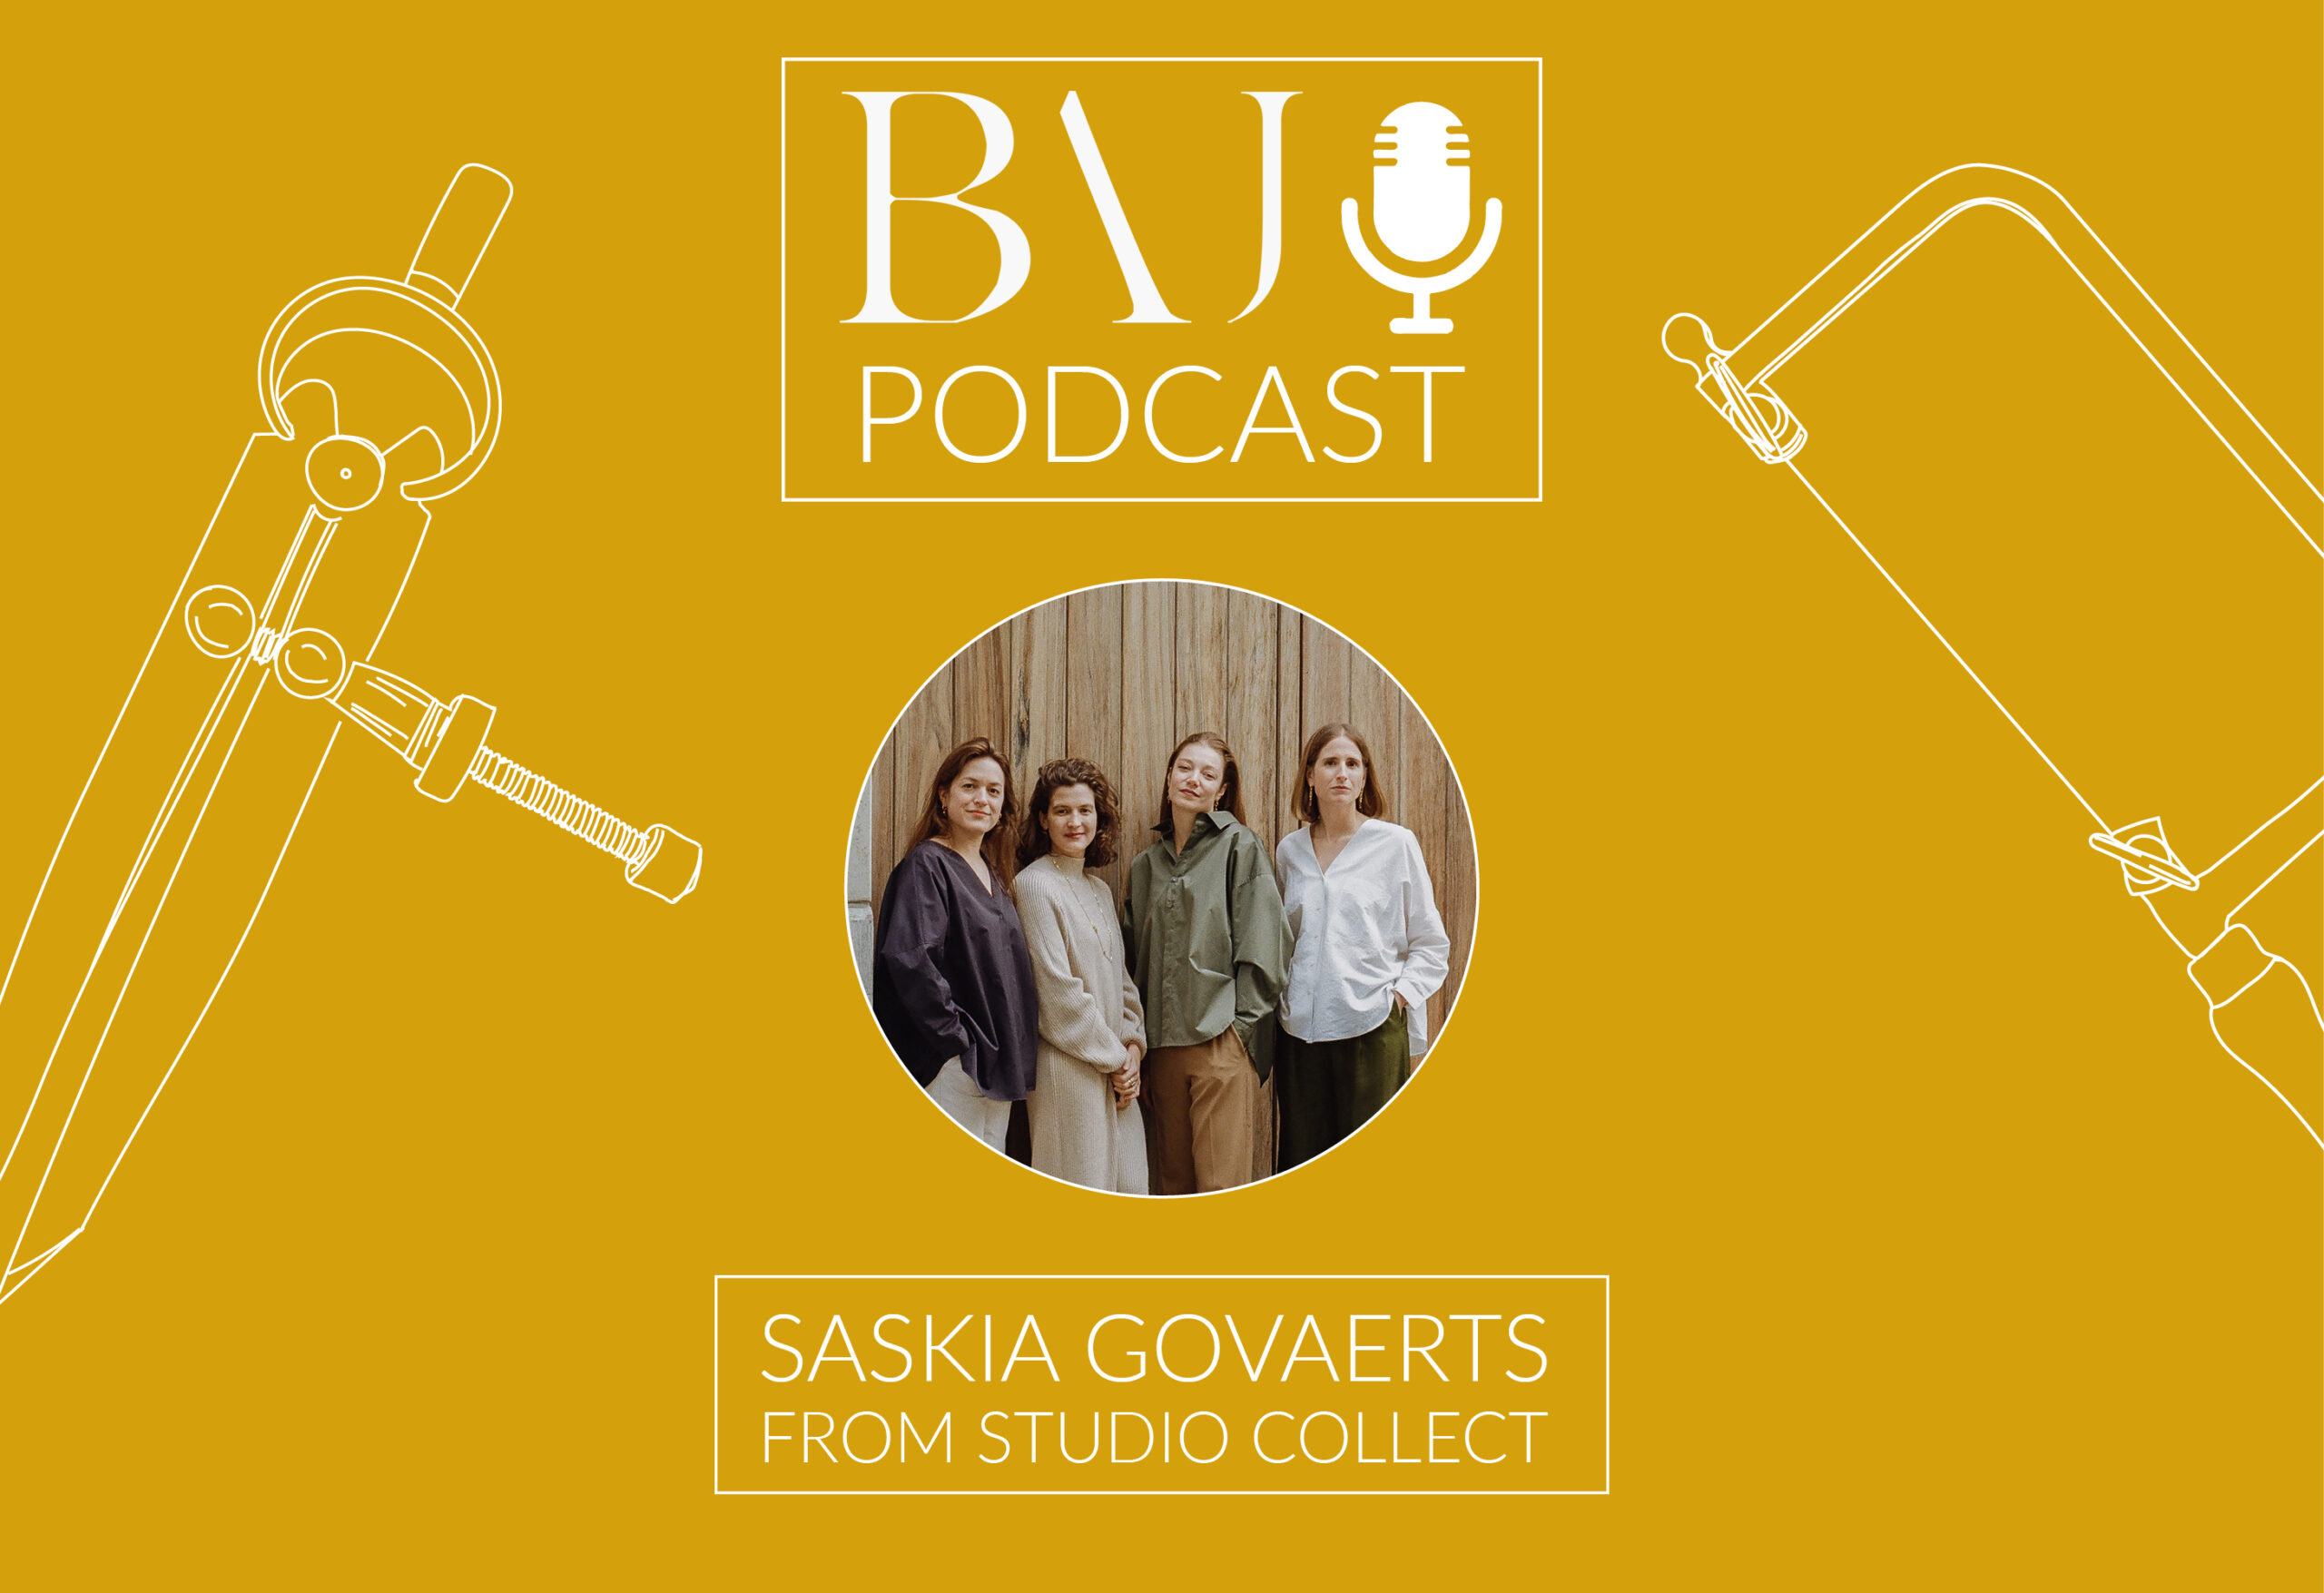 BAJ Podcast cover with Saskia Govaerts from Studio Collect